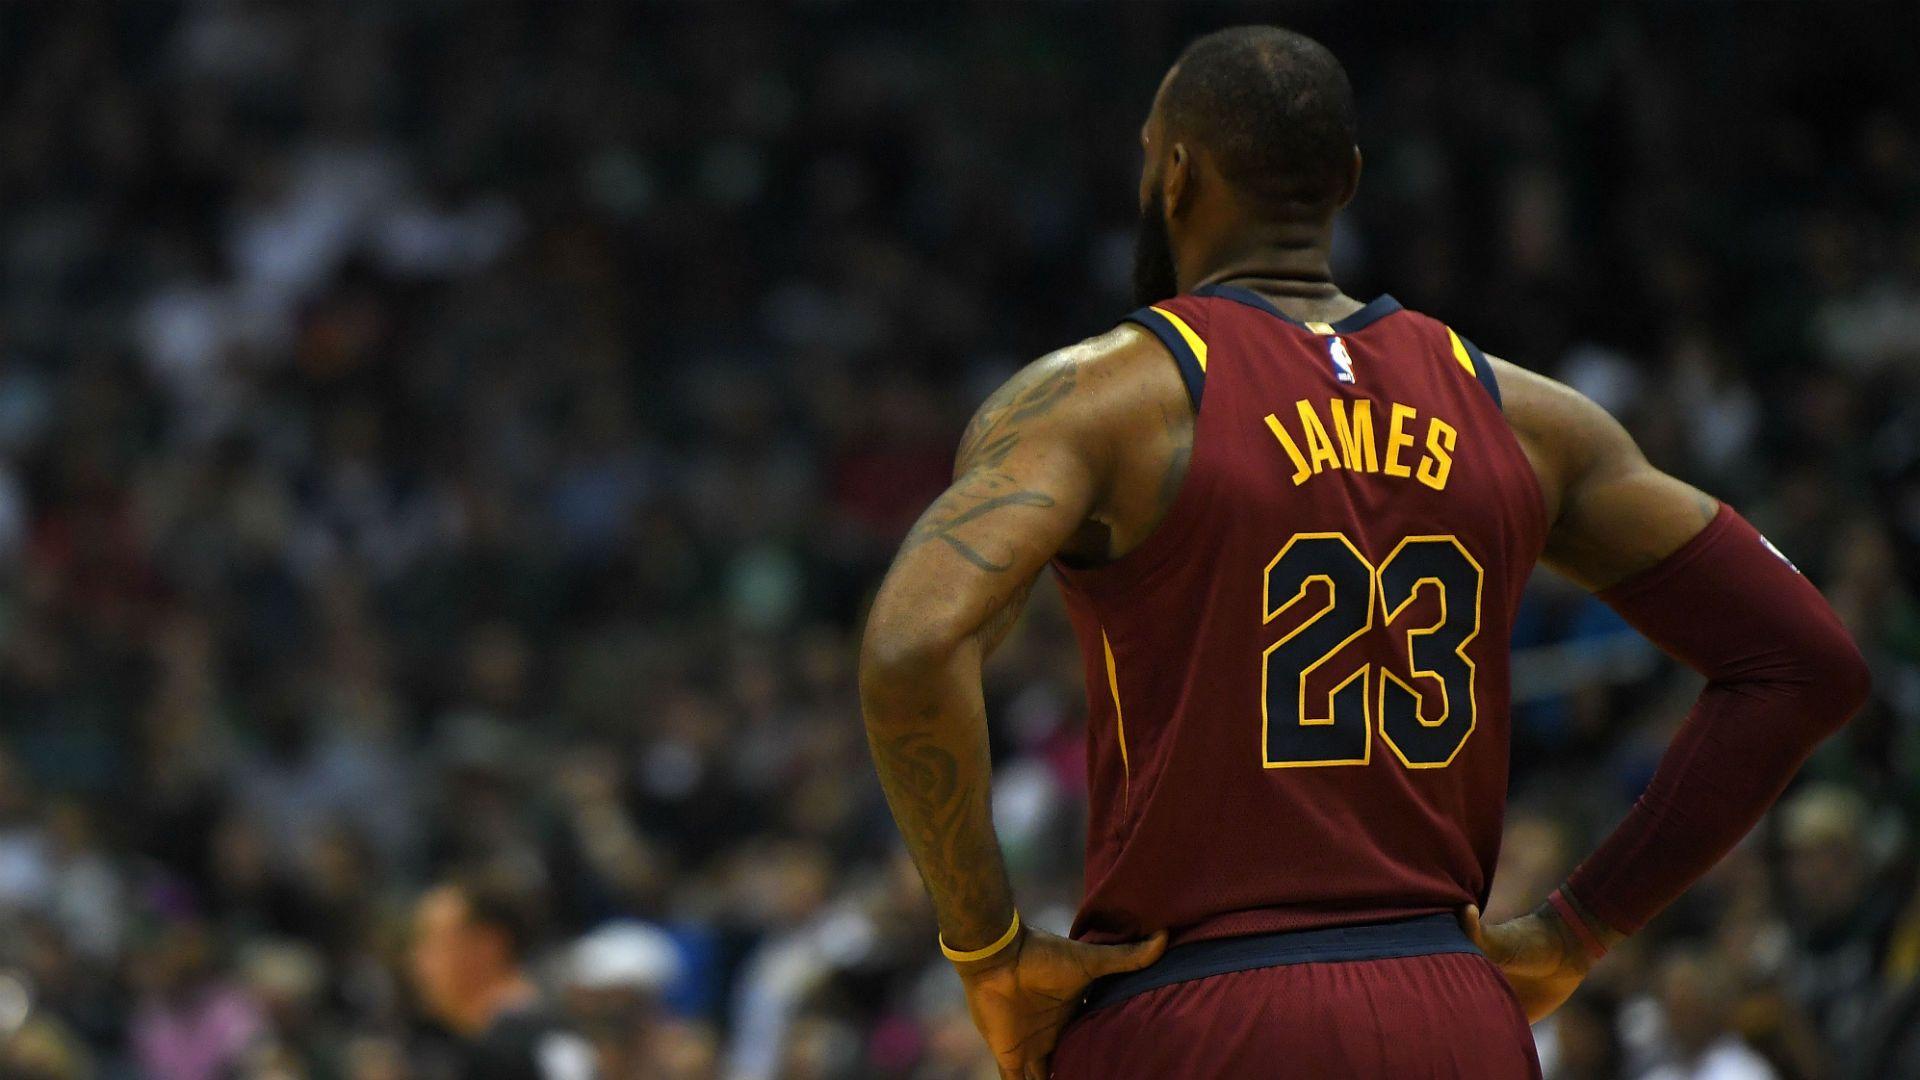 Sixers could reportedly target LeBron James, provide intriguing